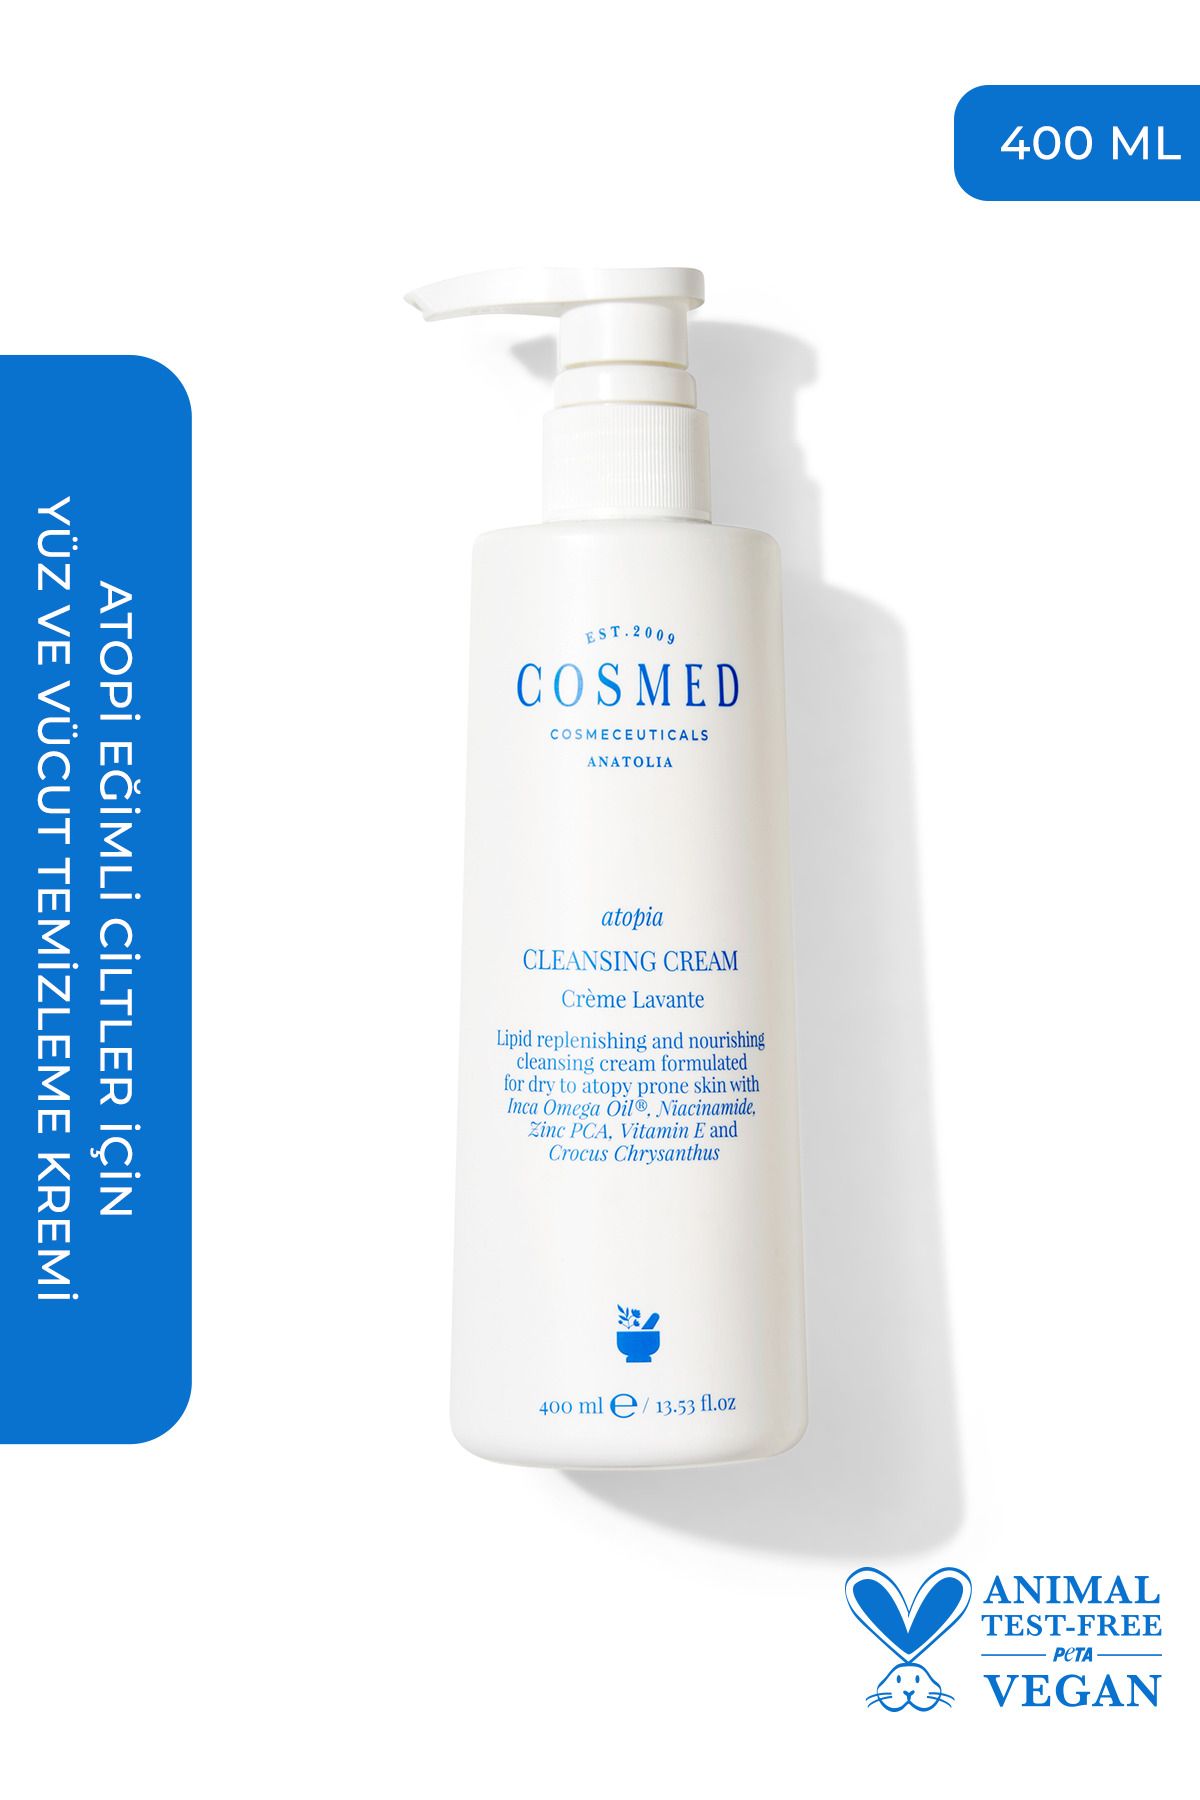 COSMED Atopia Cleansing Cream 400 ml